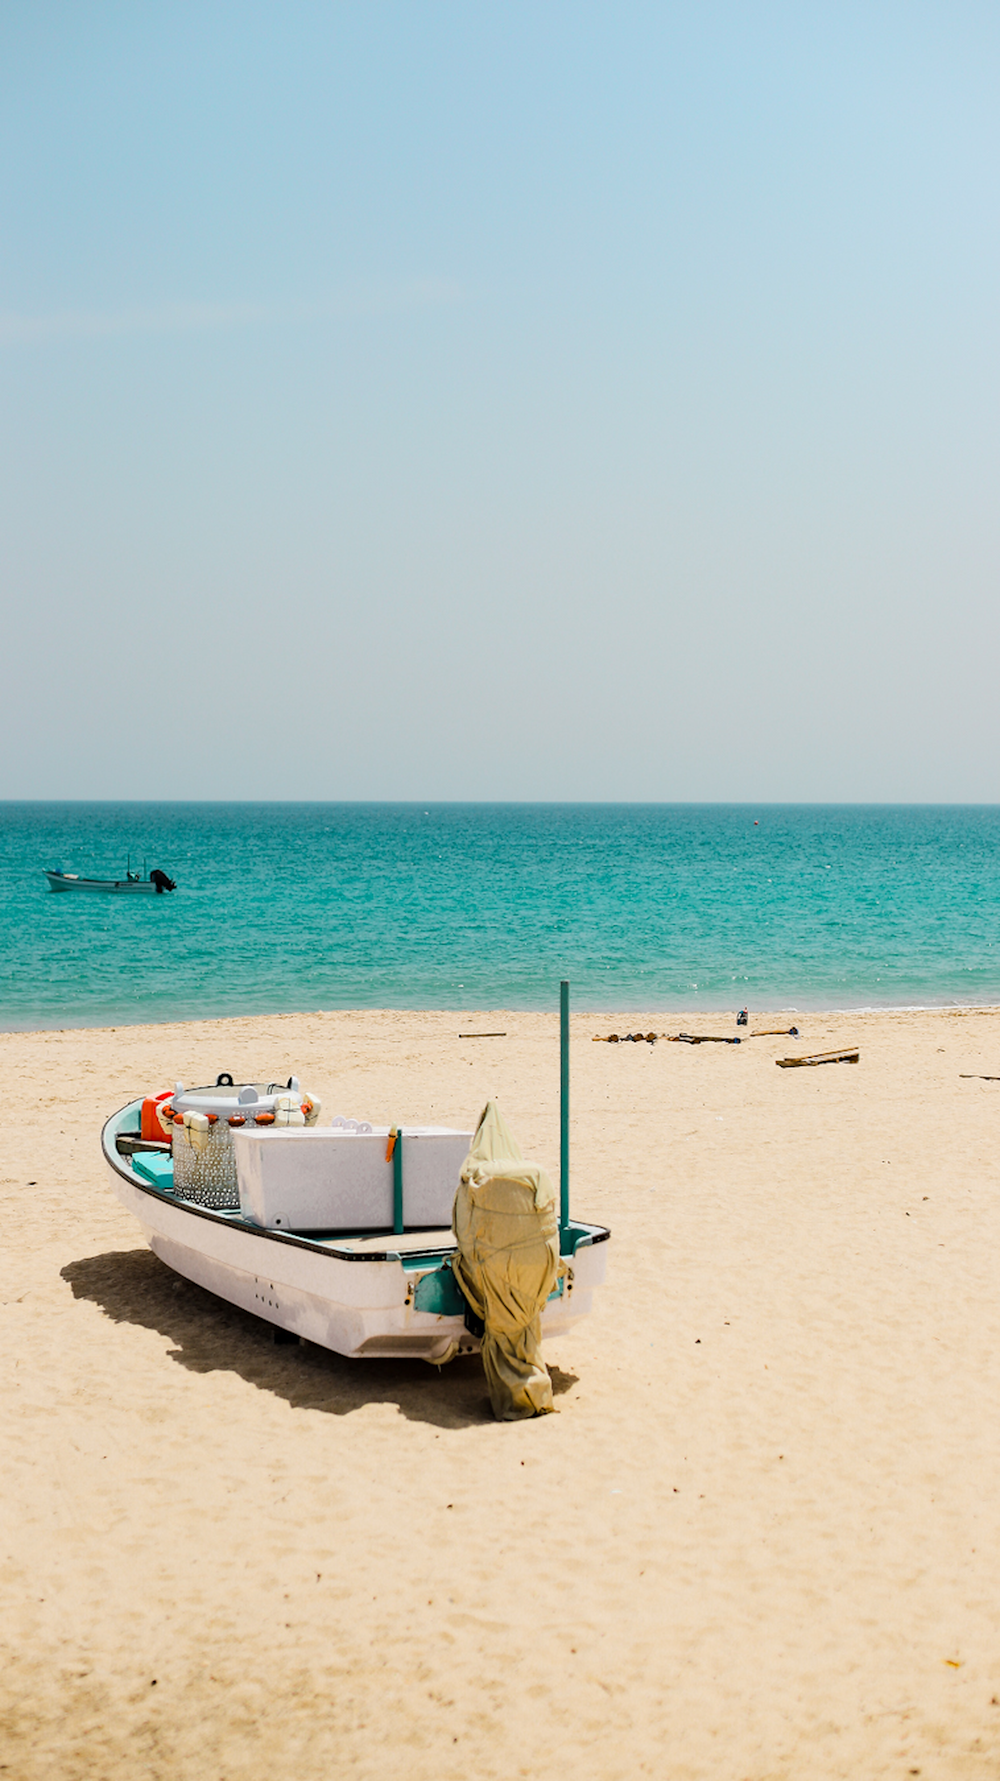 white and brown boat on beach during daytime